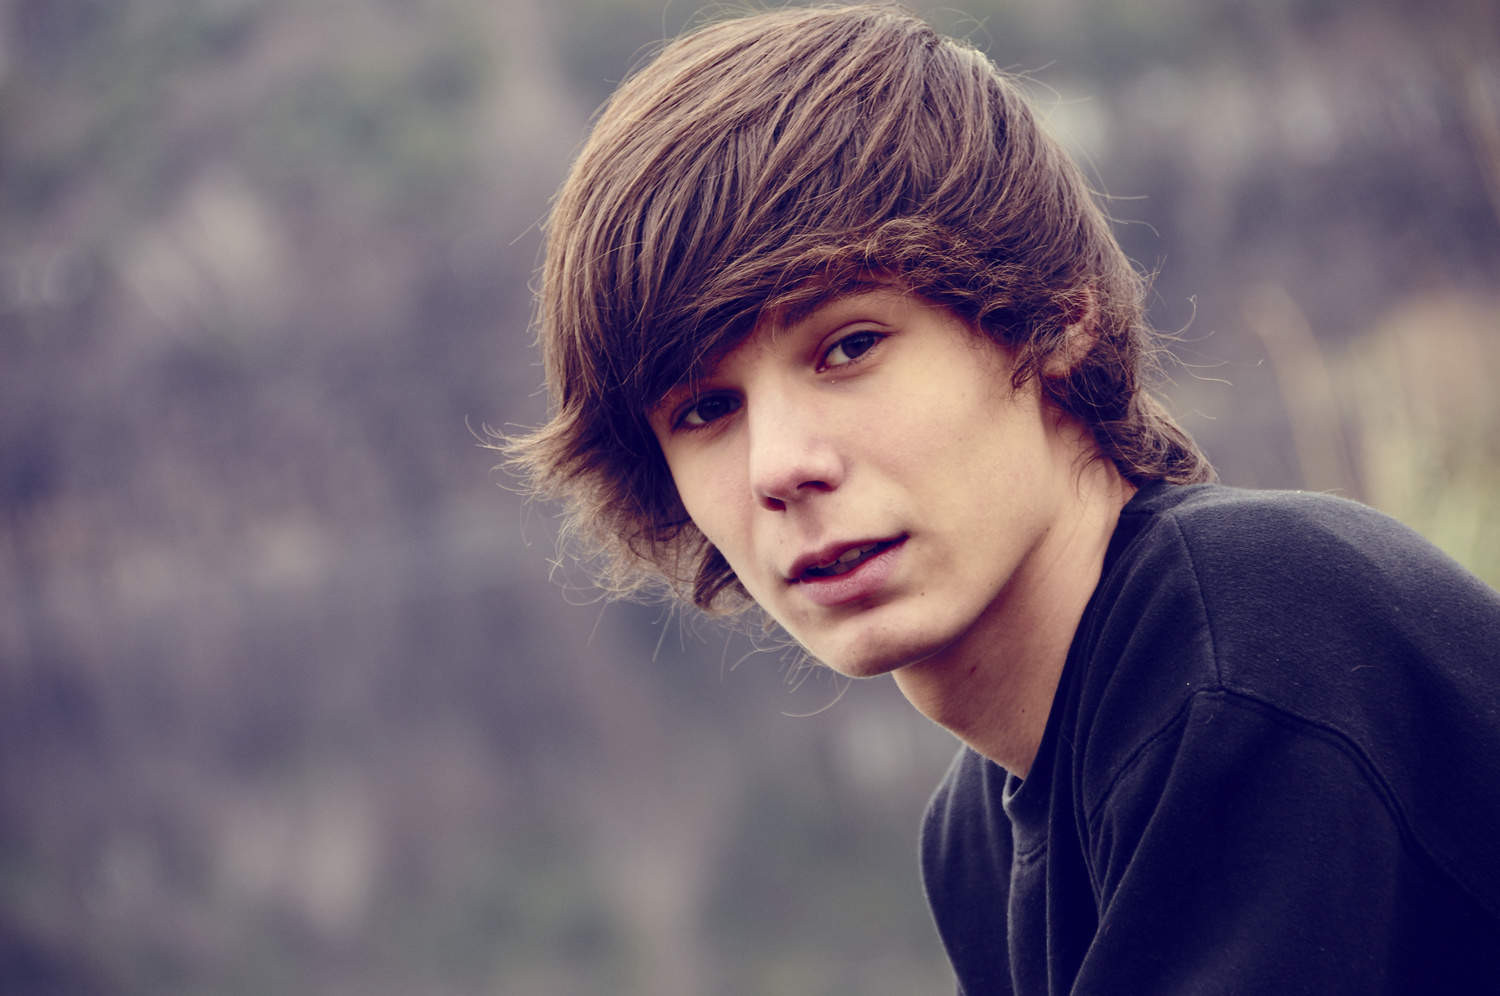 Cute Teen Boy Haircuts
 8 Simple Men Hairstyles for Handsome Boys to Look More